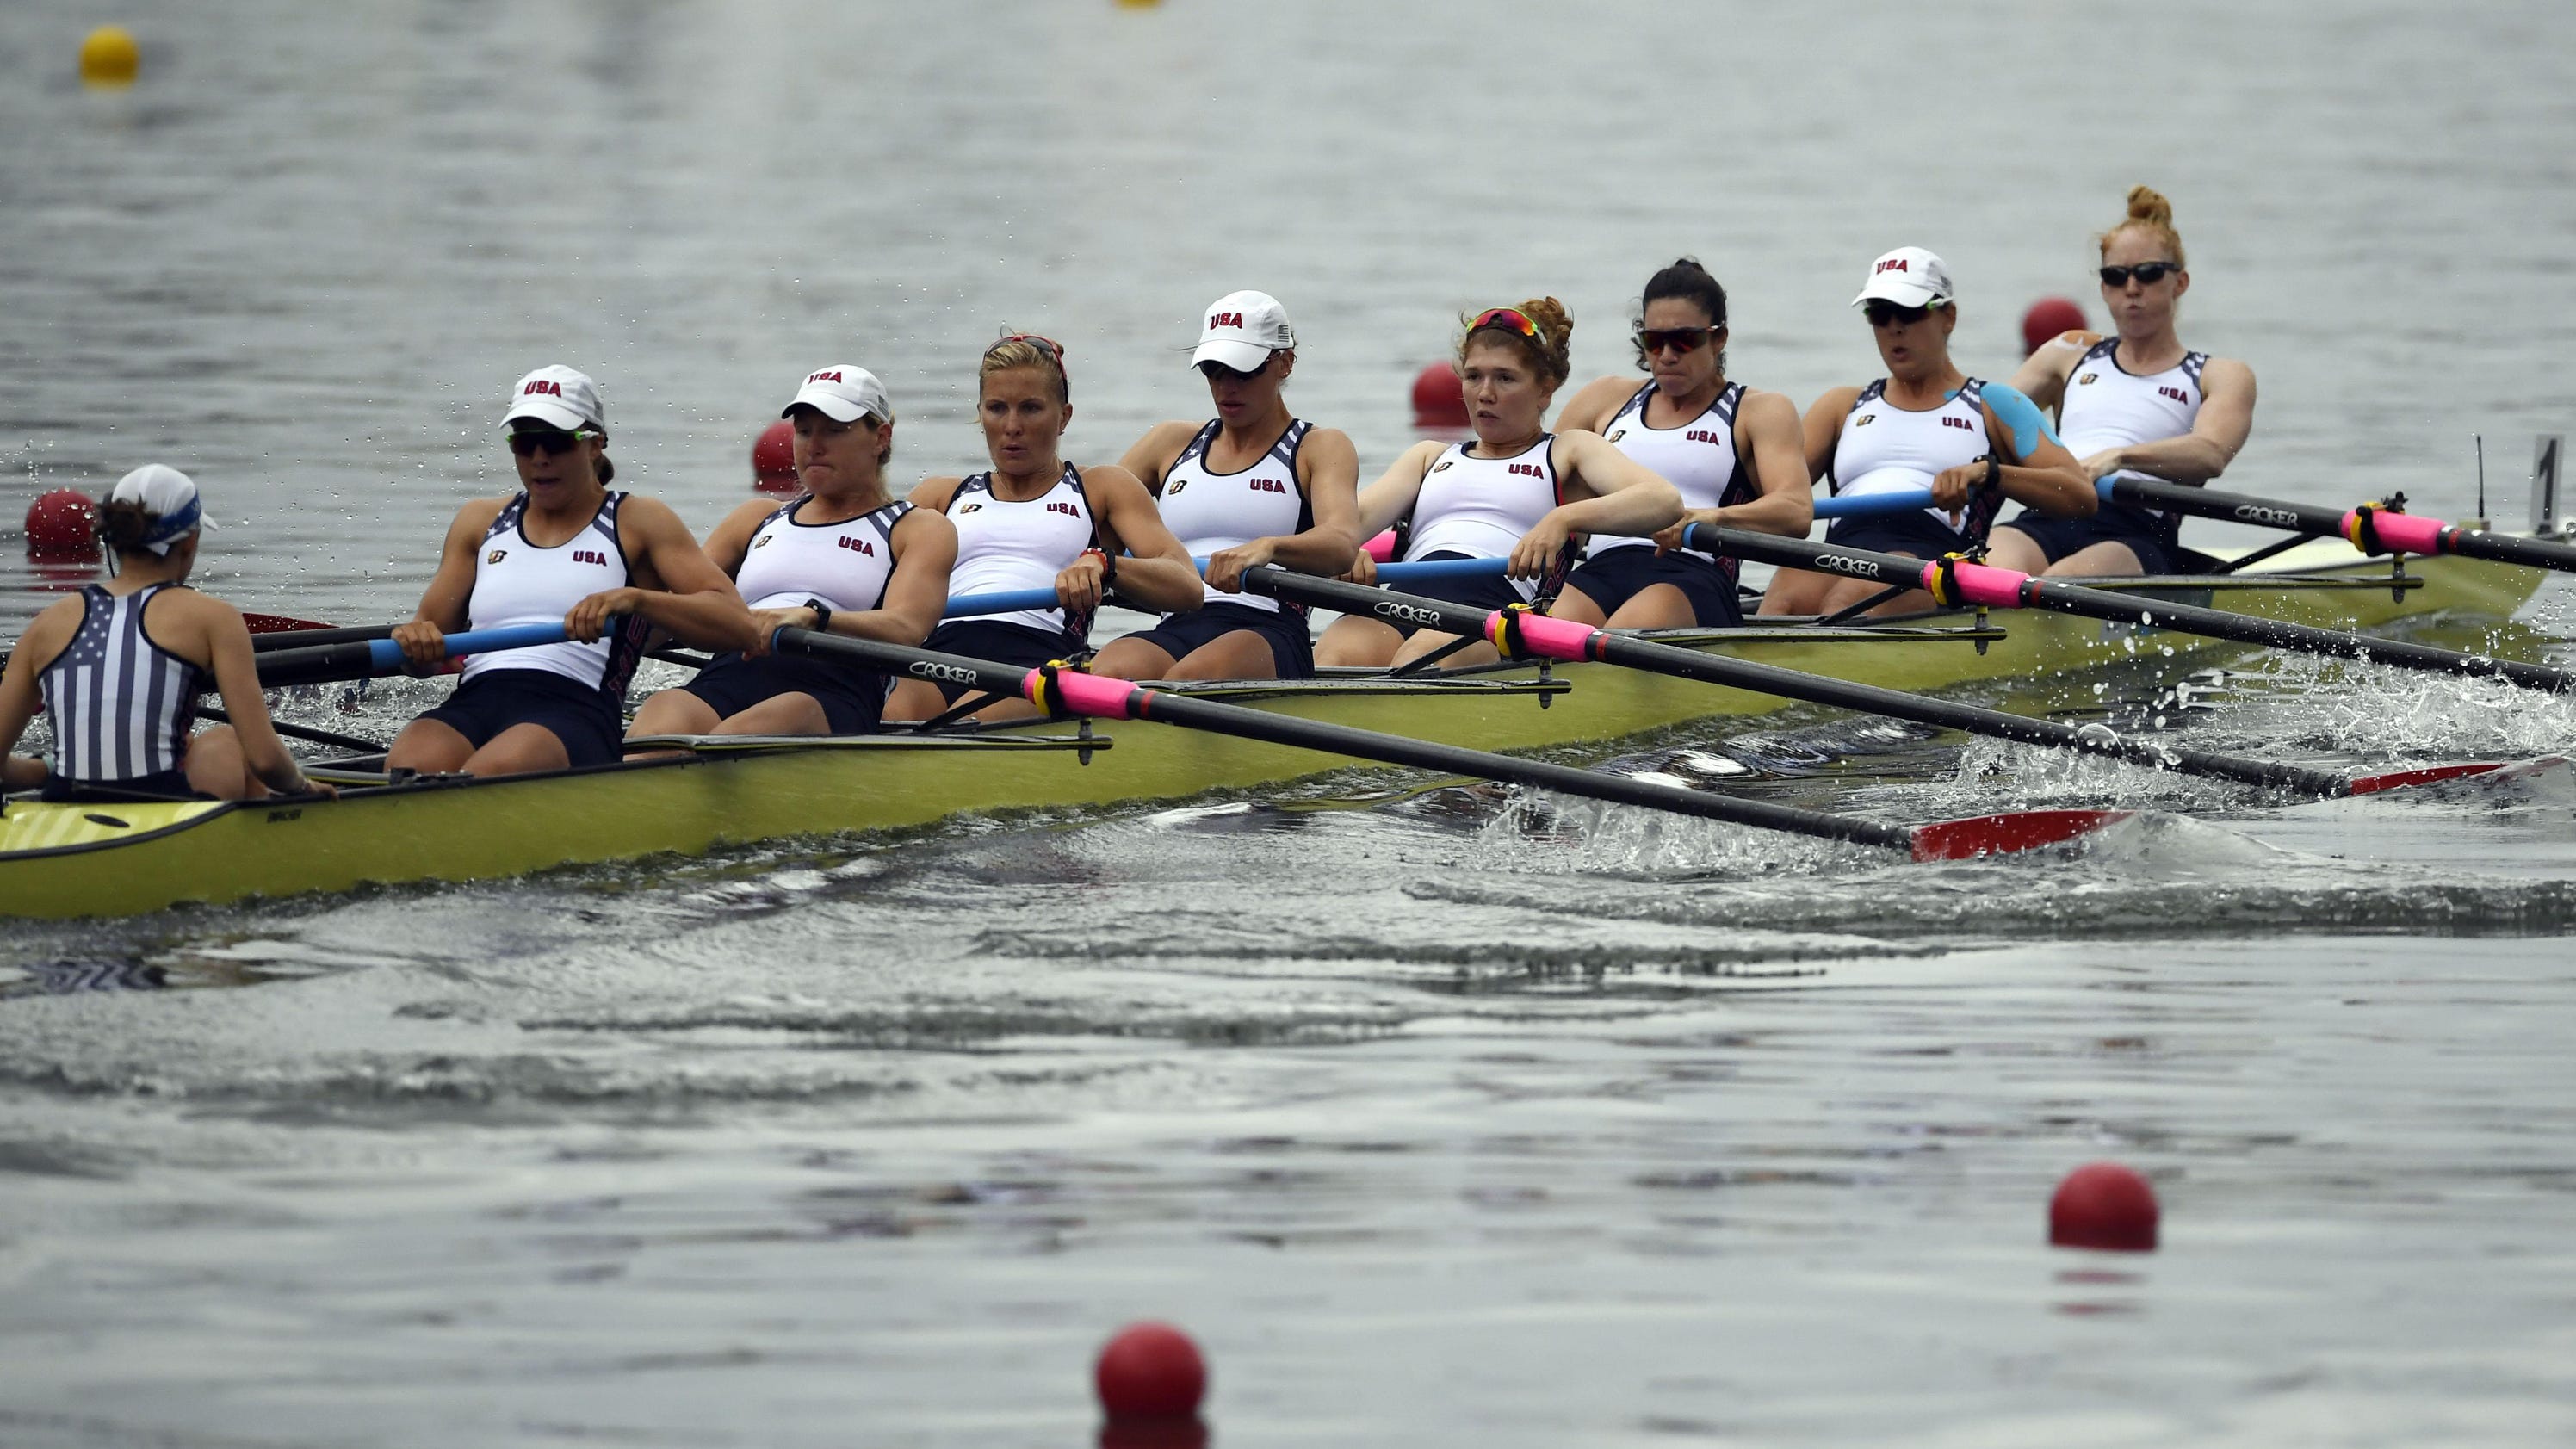 Katelin Snyder has best seat for gold medal with U.S. women’s rowing